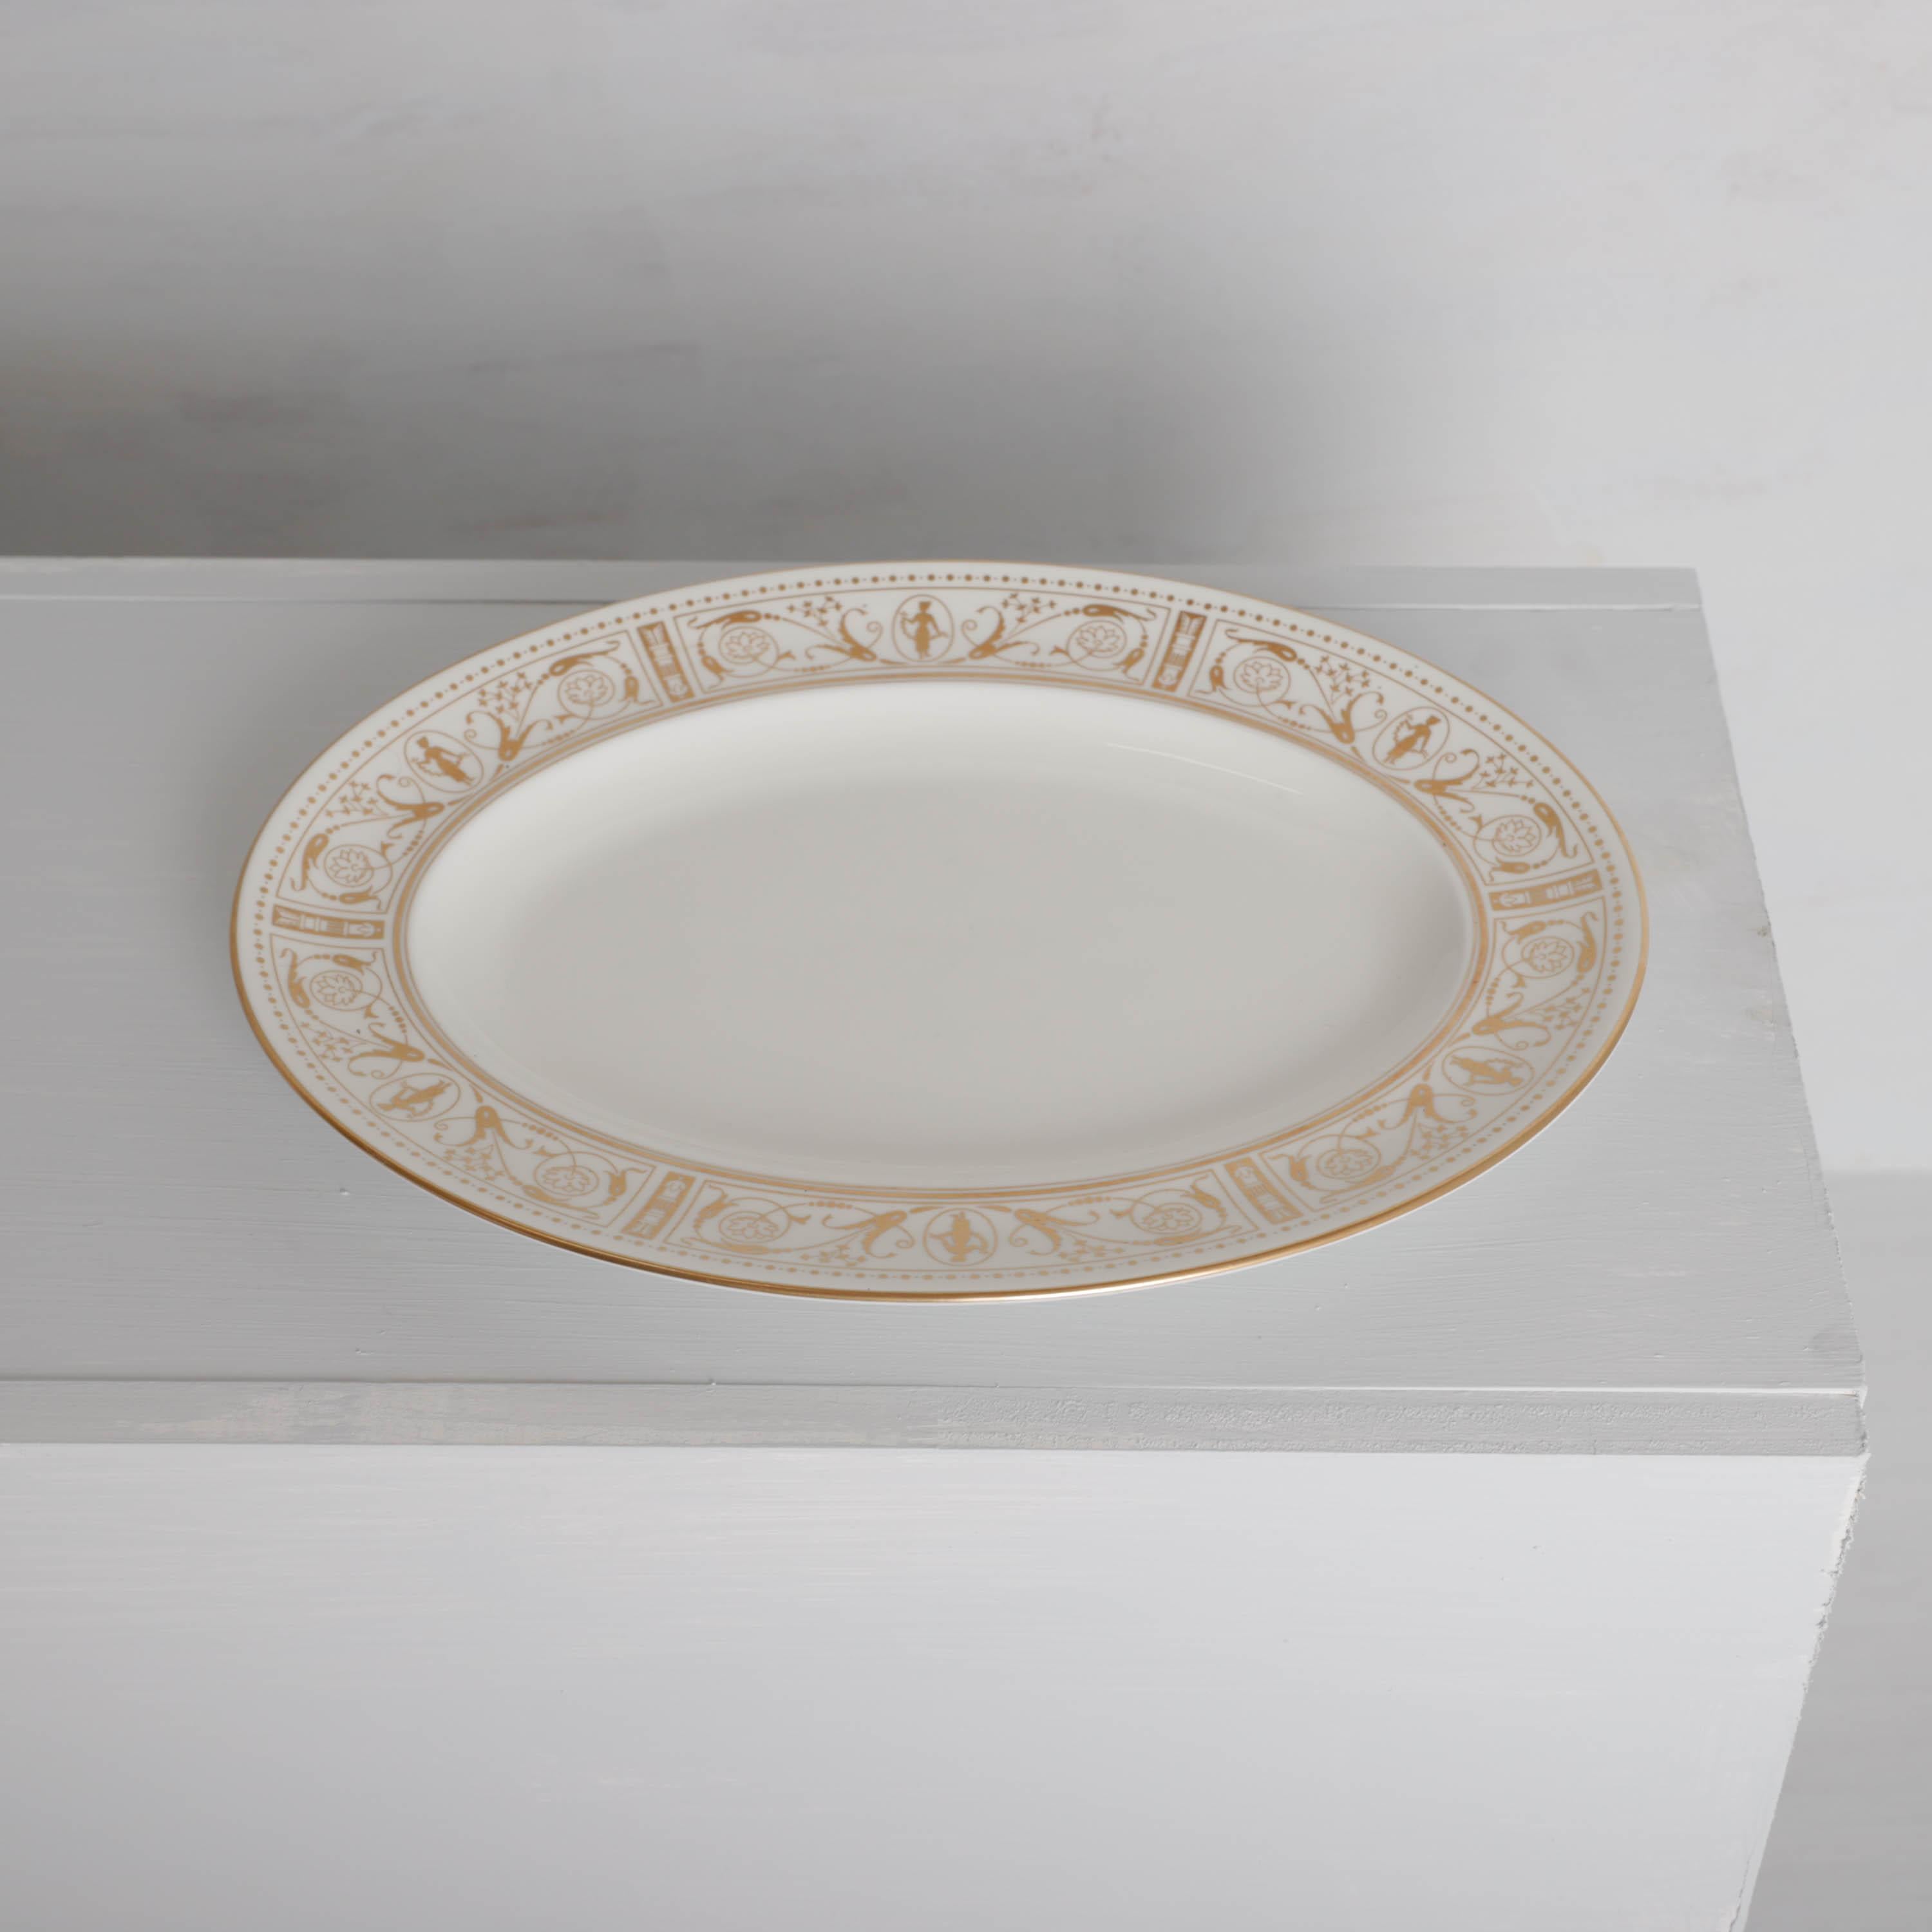 China Service for 12 Wedgewood Gold Grecian Circa 1964 For Sale 1